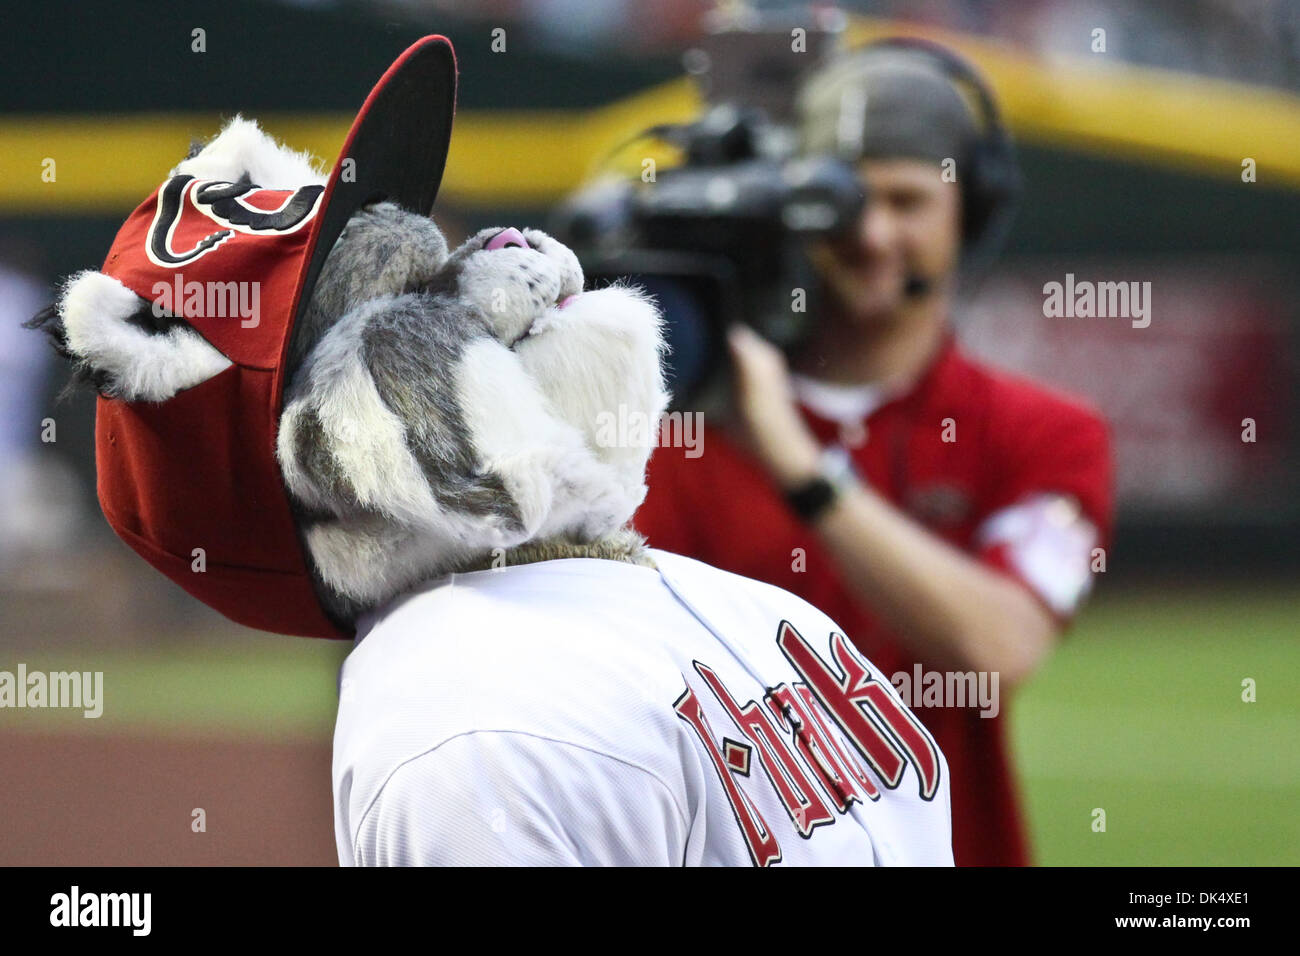 Apr. 15, 2011 - Phoenix, Arizona, U.S - Arizona Diamondbacks mascot Baxter  hams it up prior to the first pitch of a game against the San Francisco  Giants. The Giants defeated the